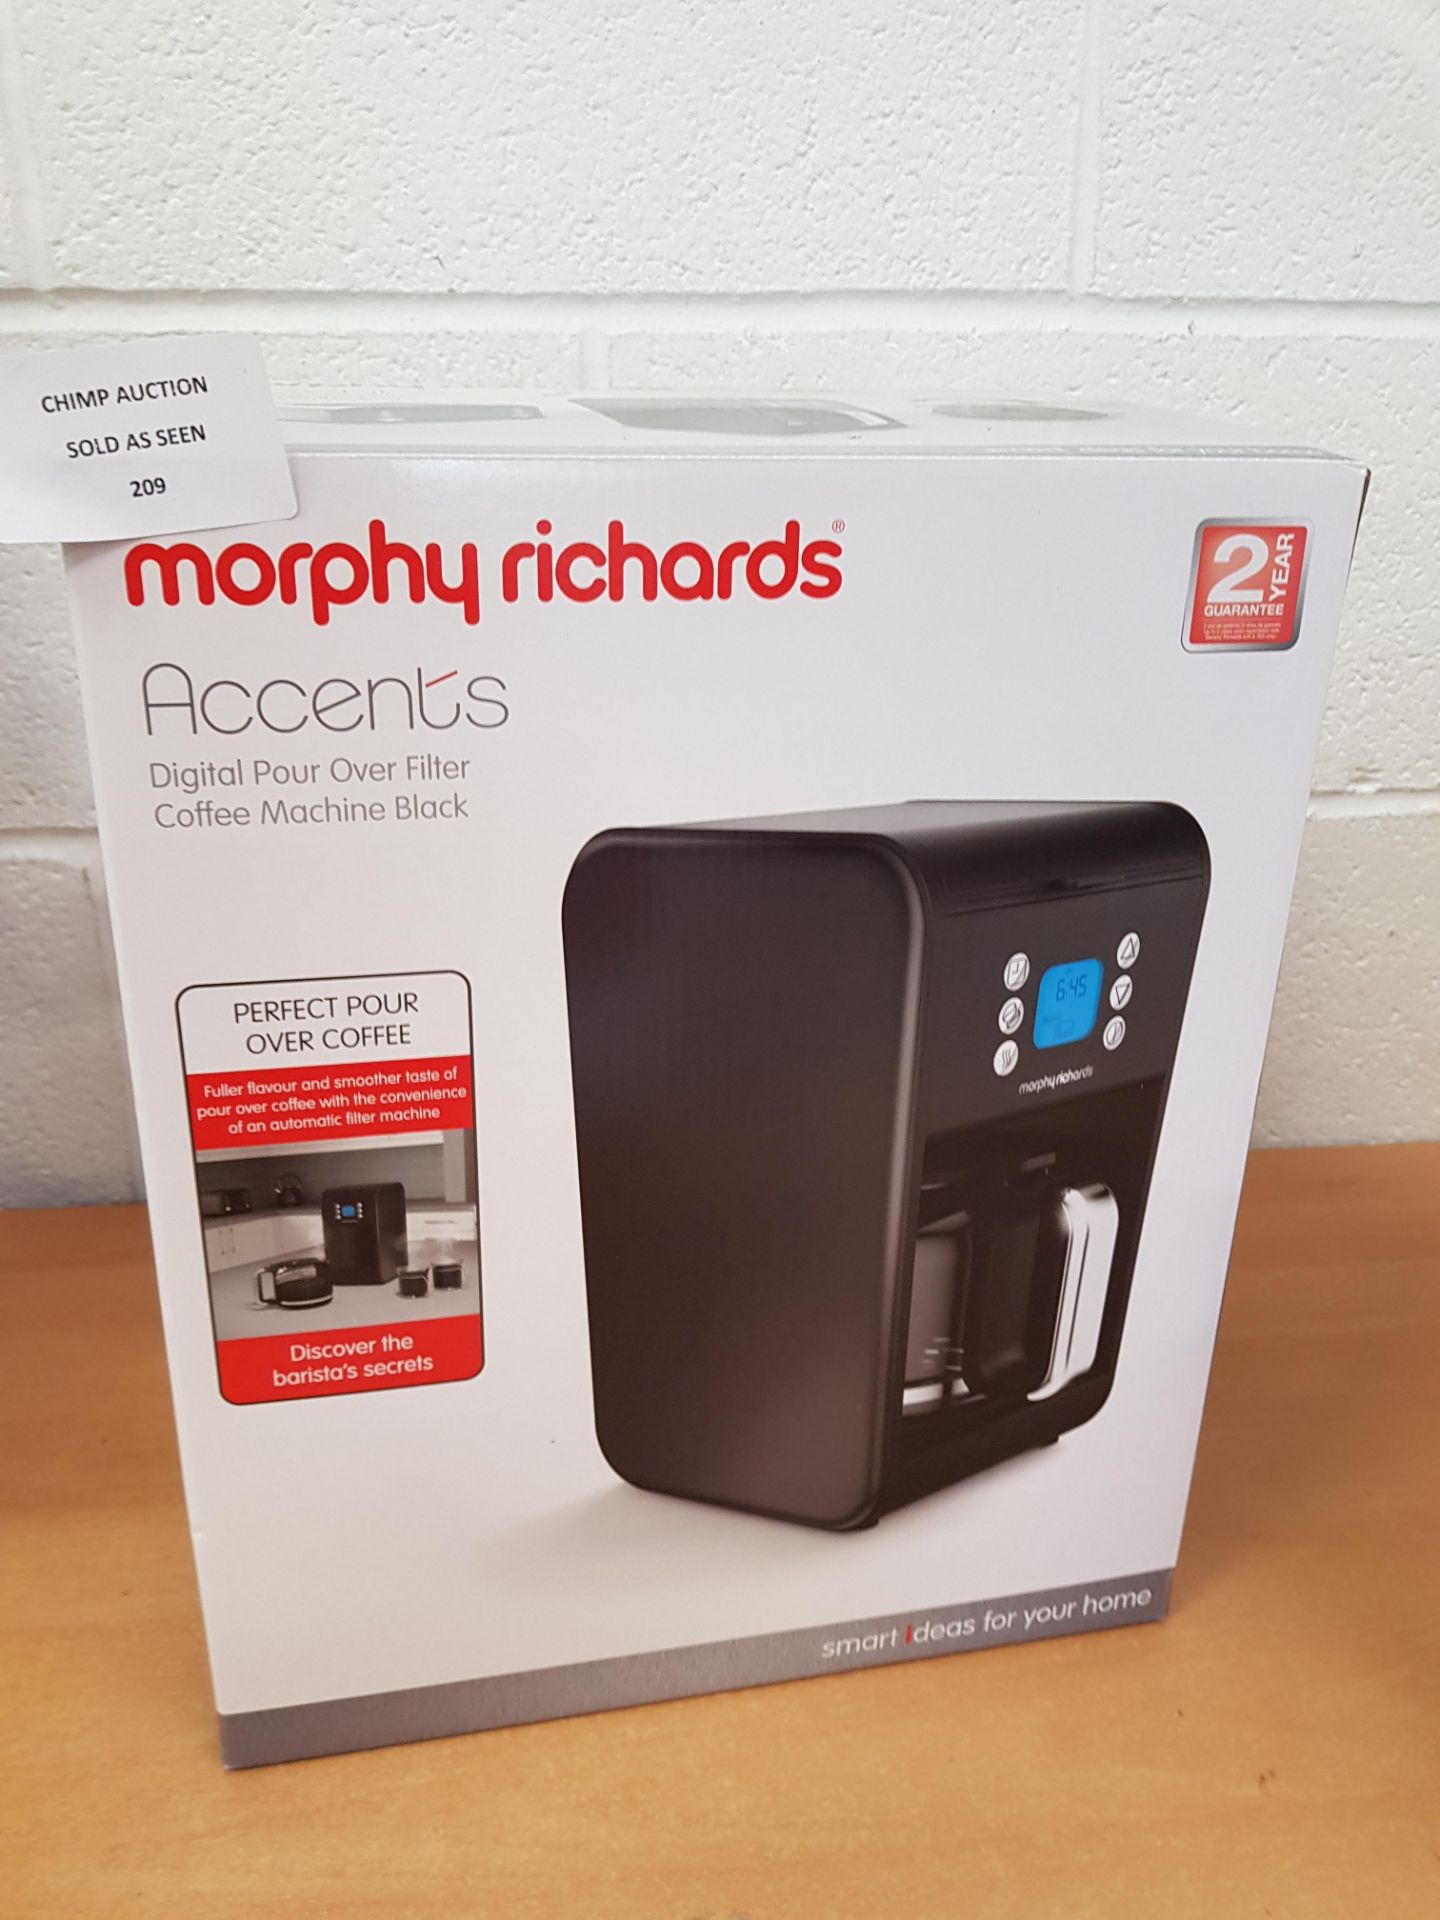 Morphy Richards accents Digital Pour Coffee Machine